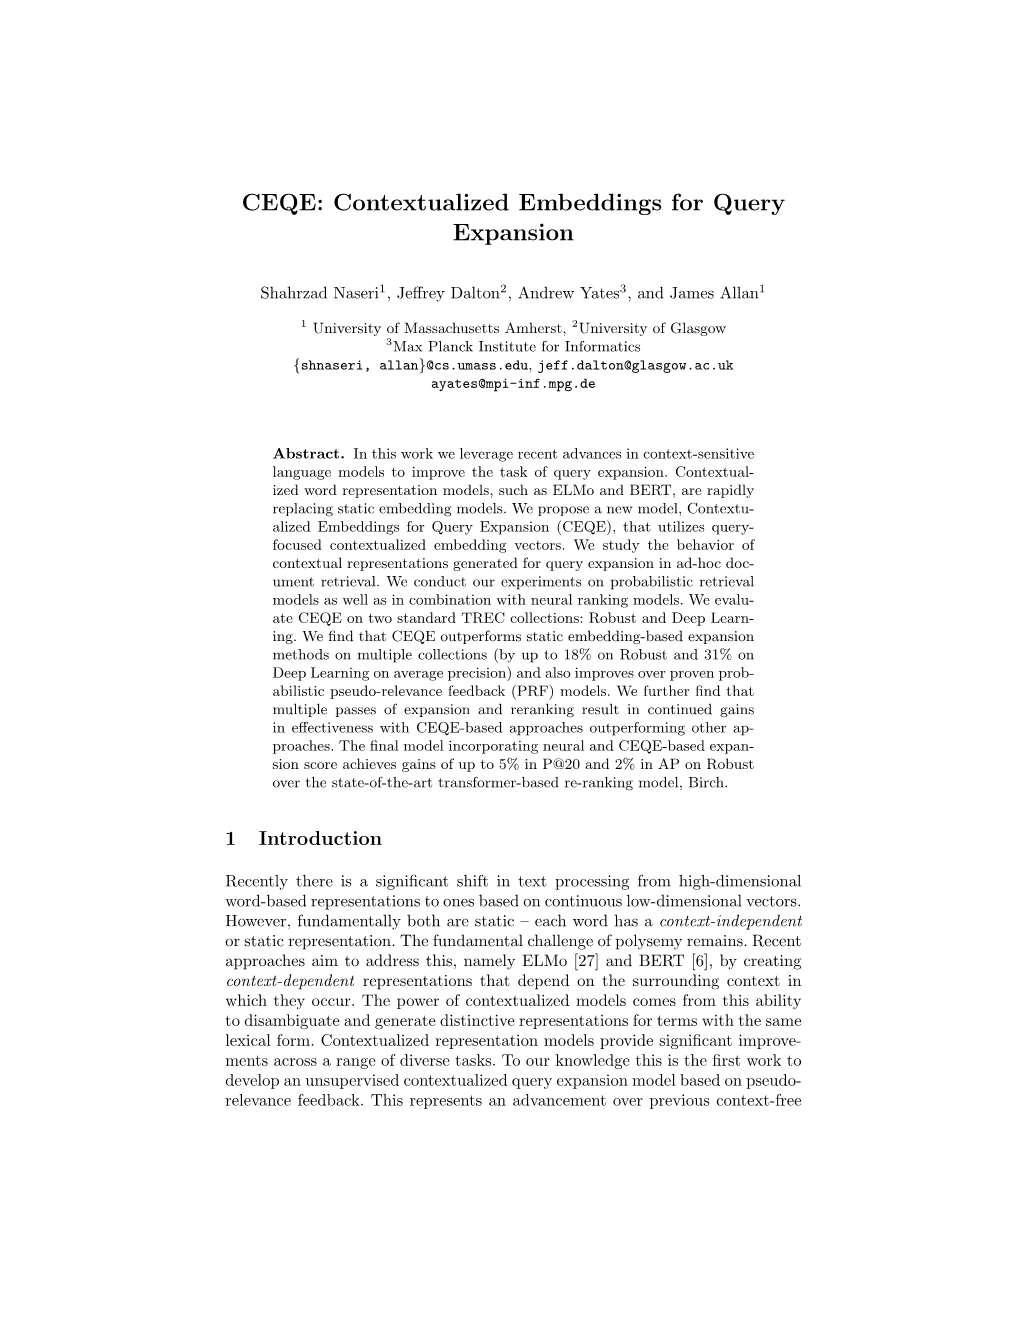 CEQE: Contextualized Embeddings for Query Expansion